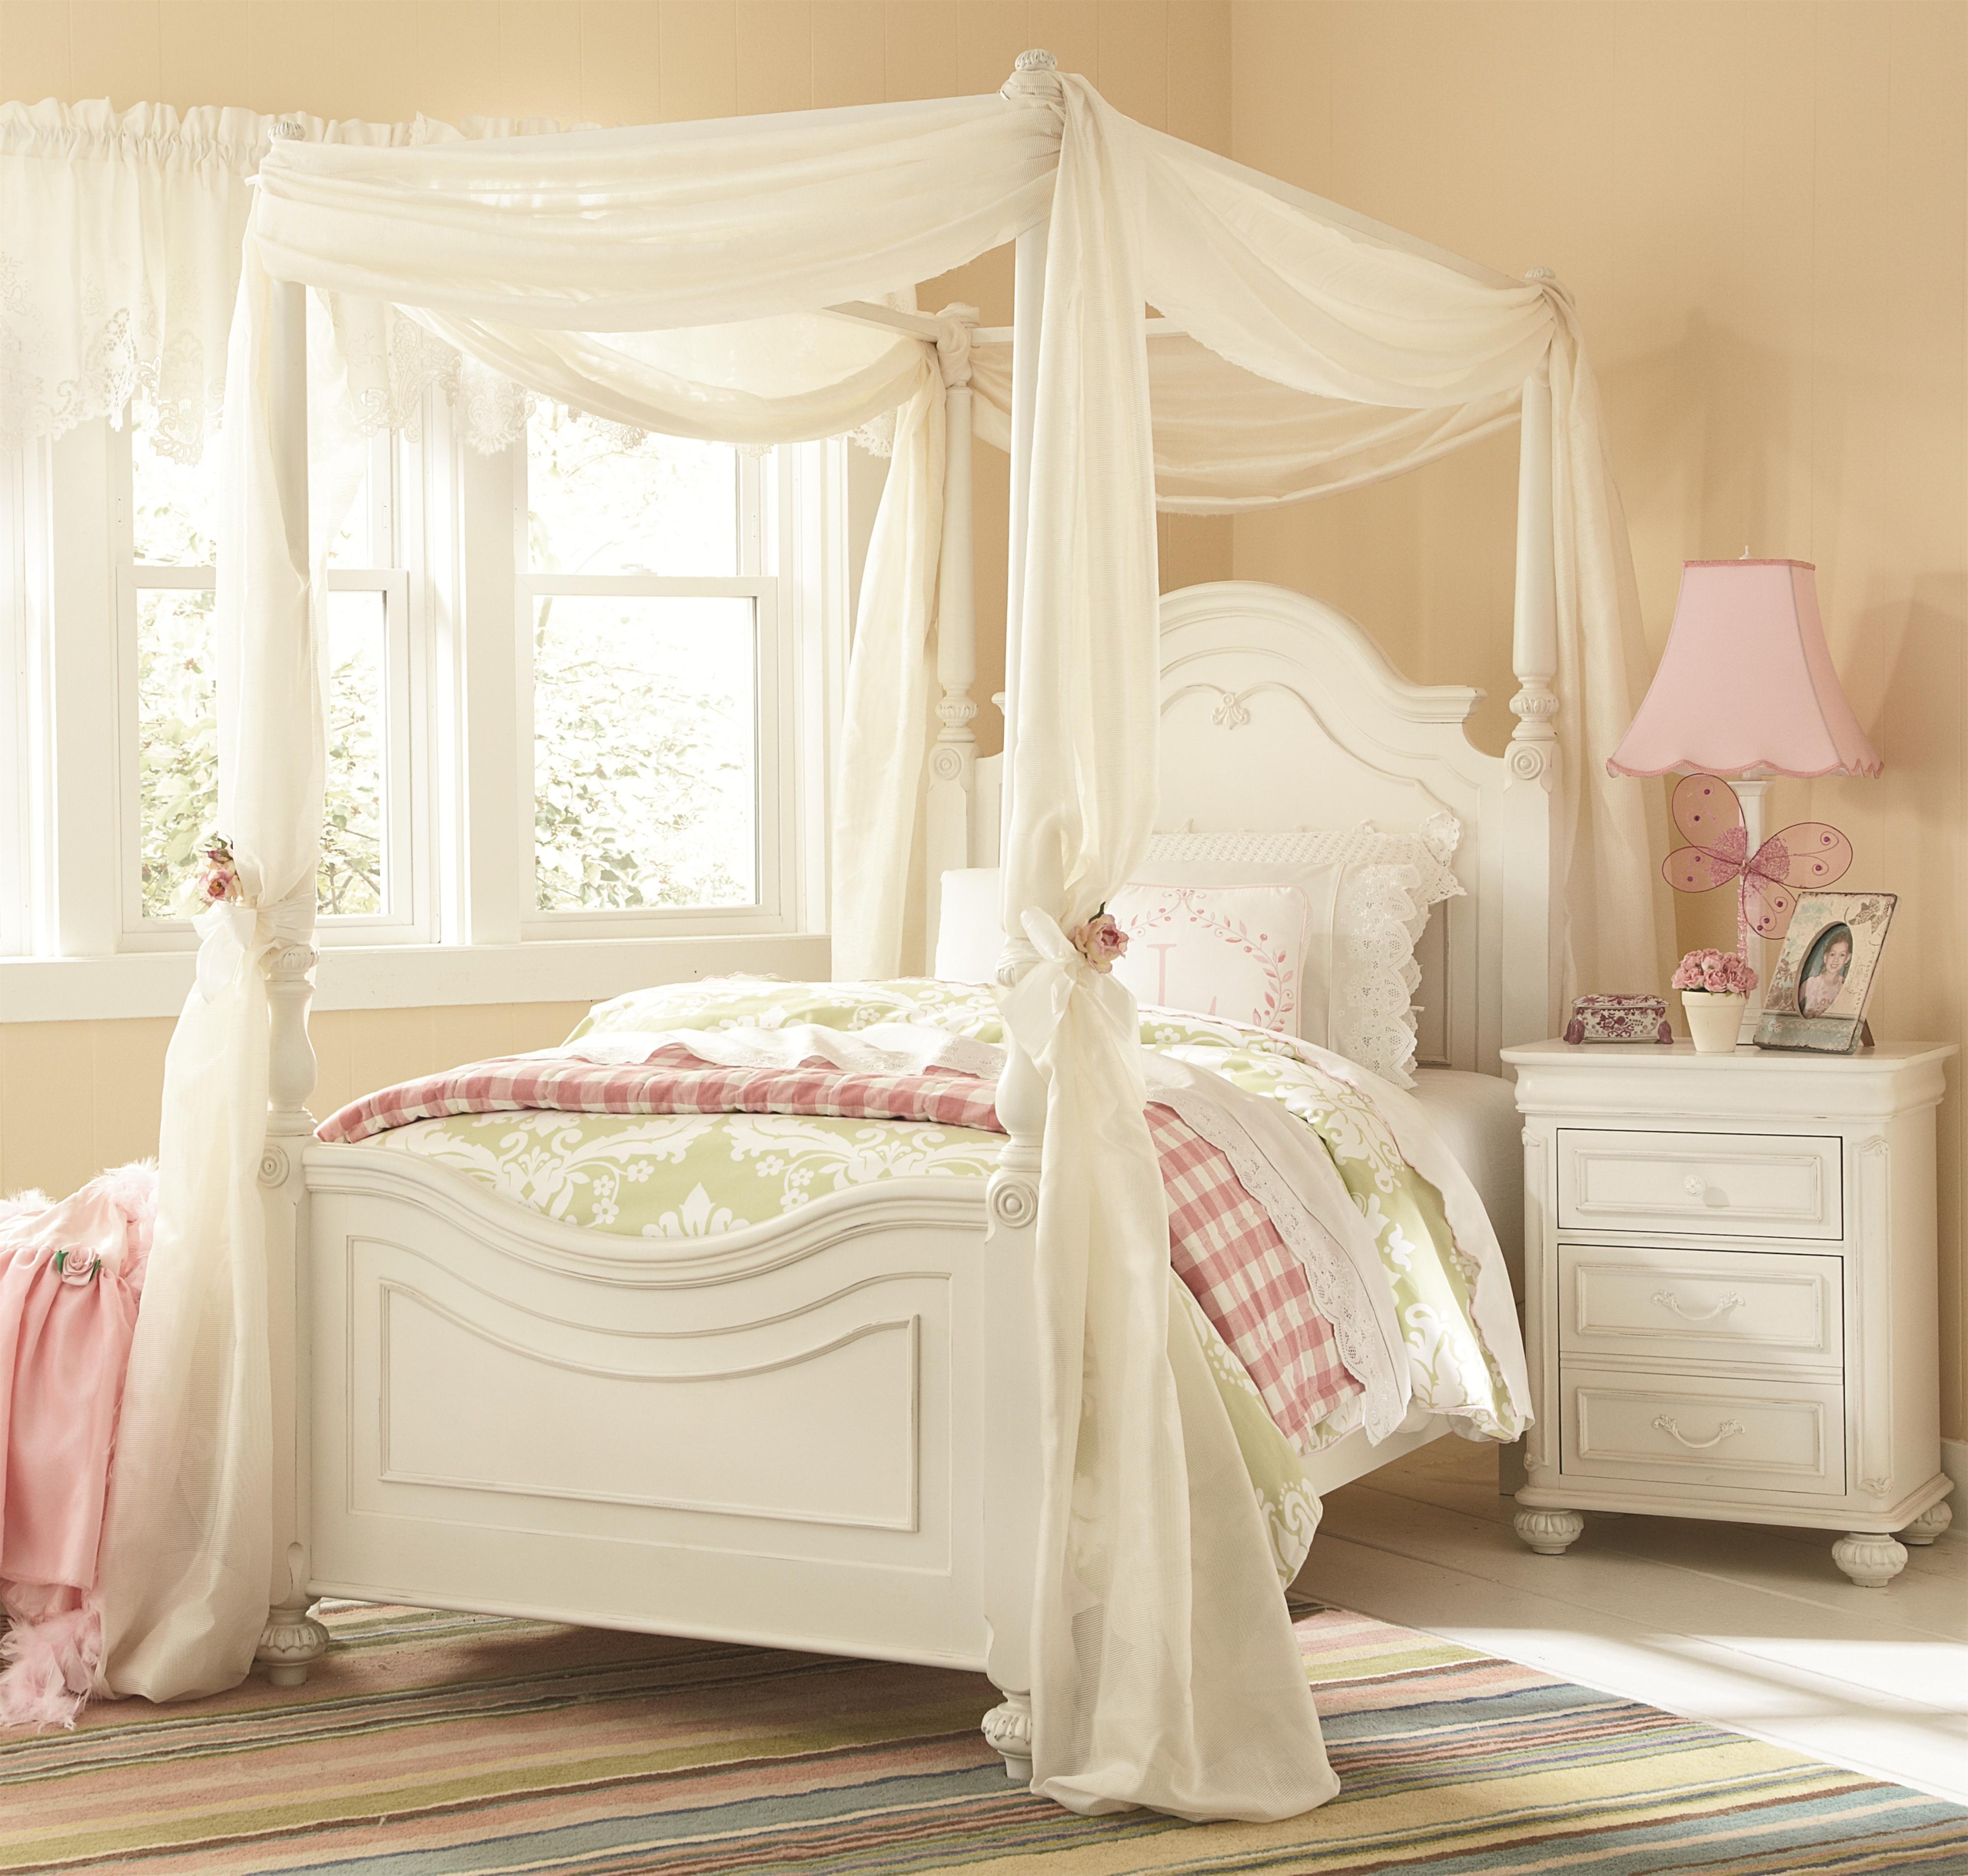 Four poster twin bed frame